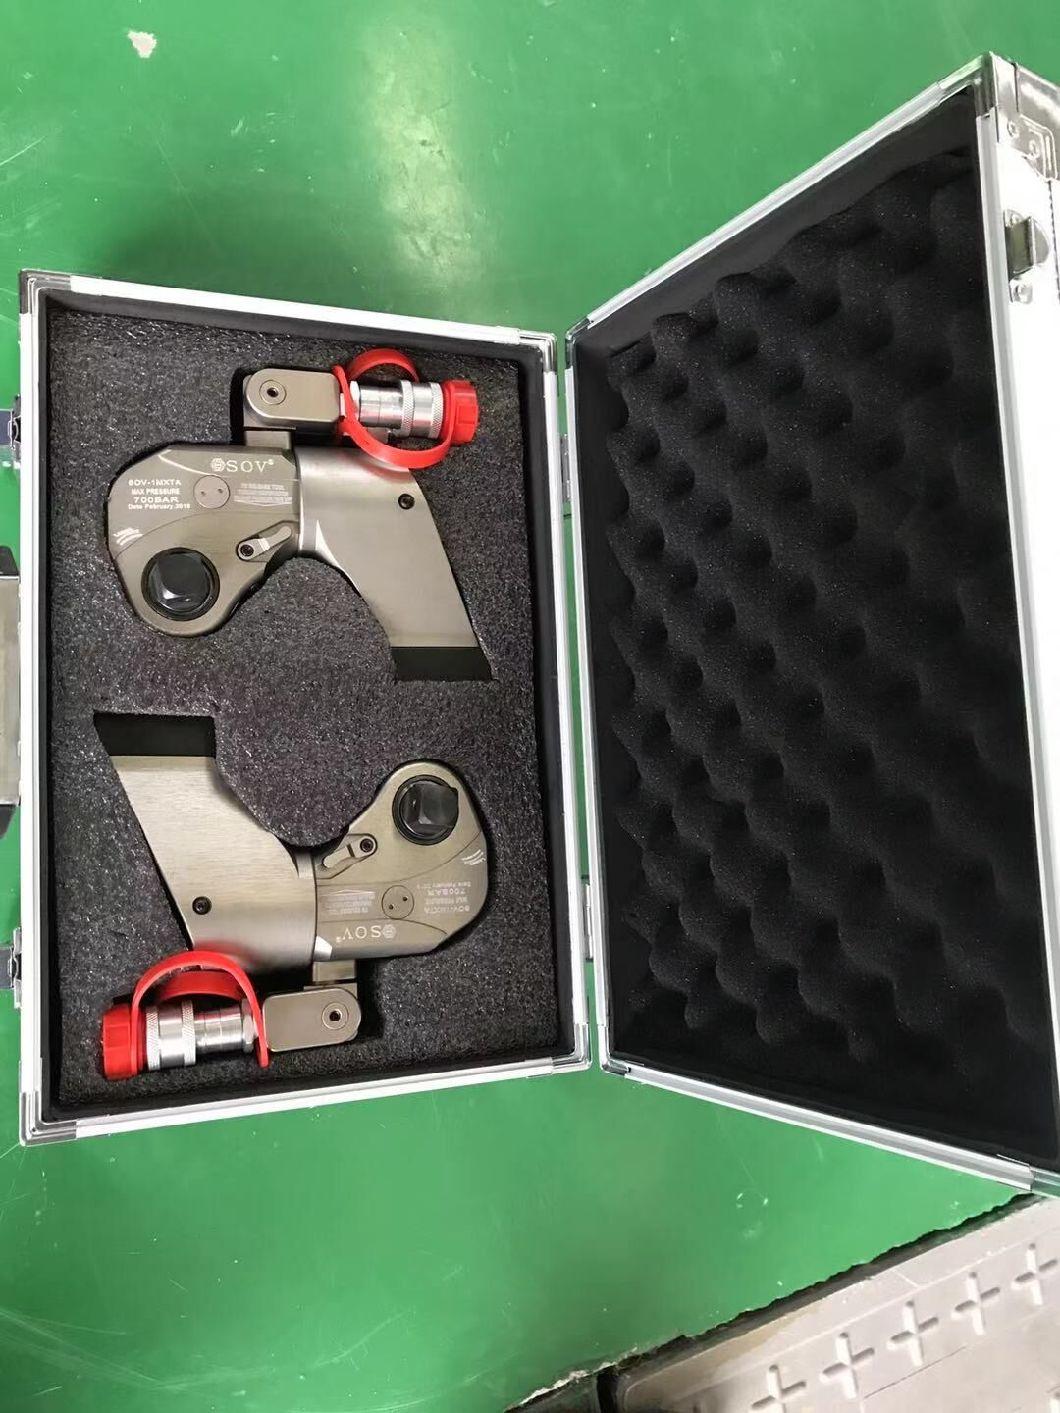 Hytorc Same Square Drive Hydraulic Torque Wrench Set Factory Price